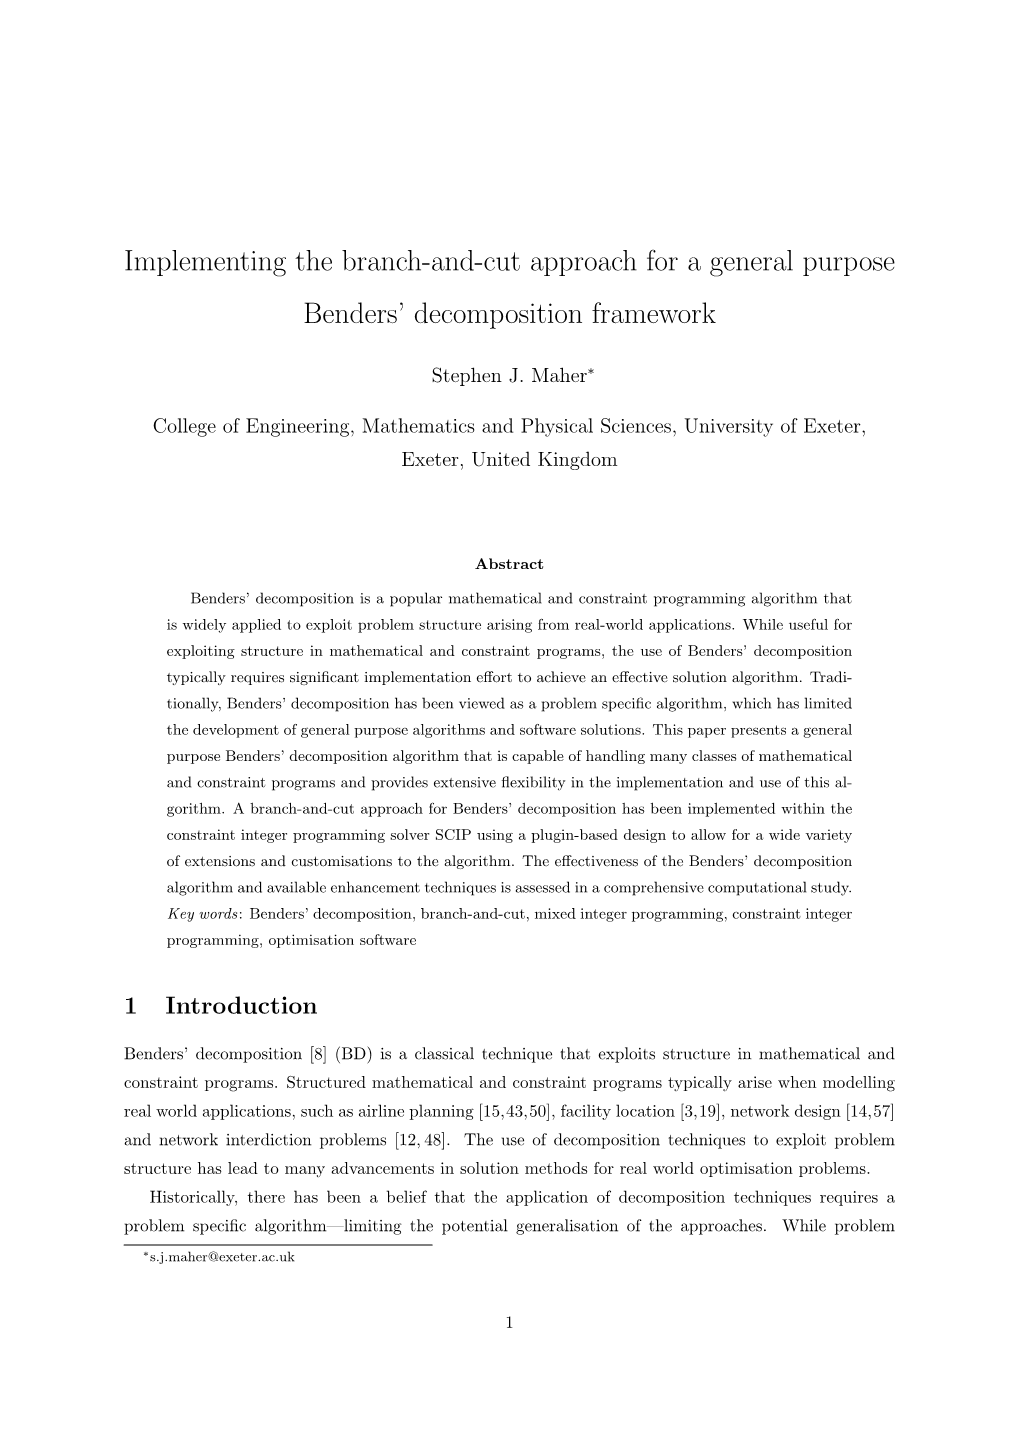 Implementing the Branch-And-Cut Approach for a General Purpose Benders’ Decomposition Framework